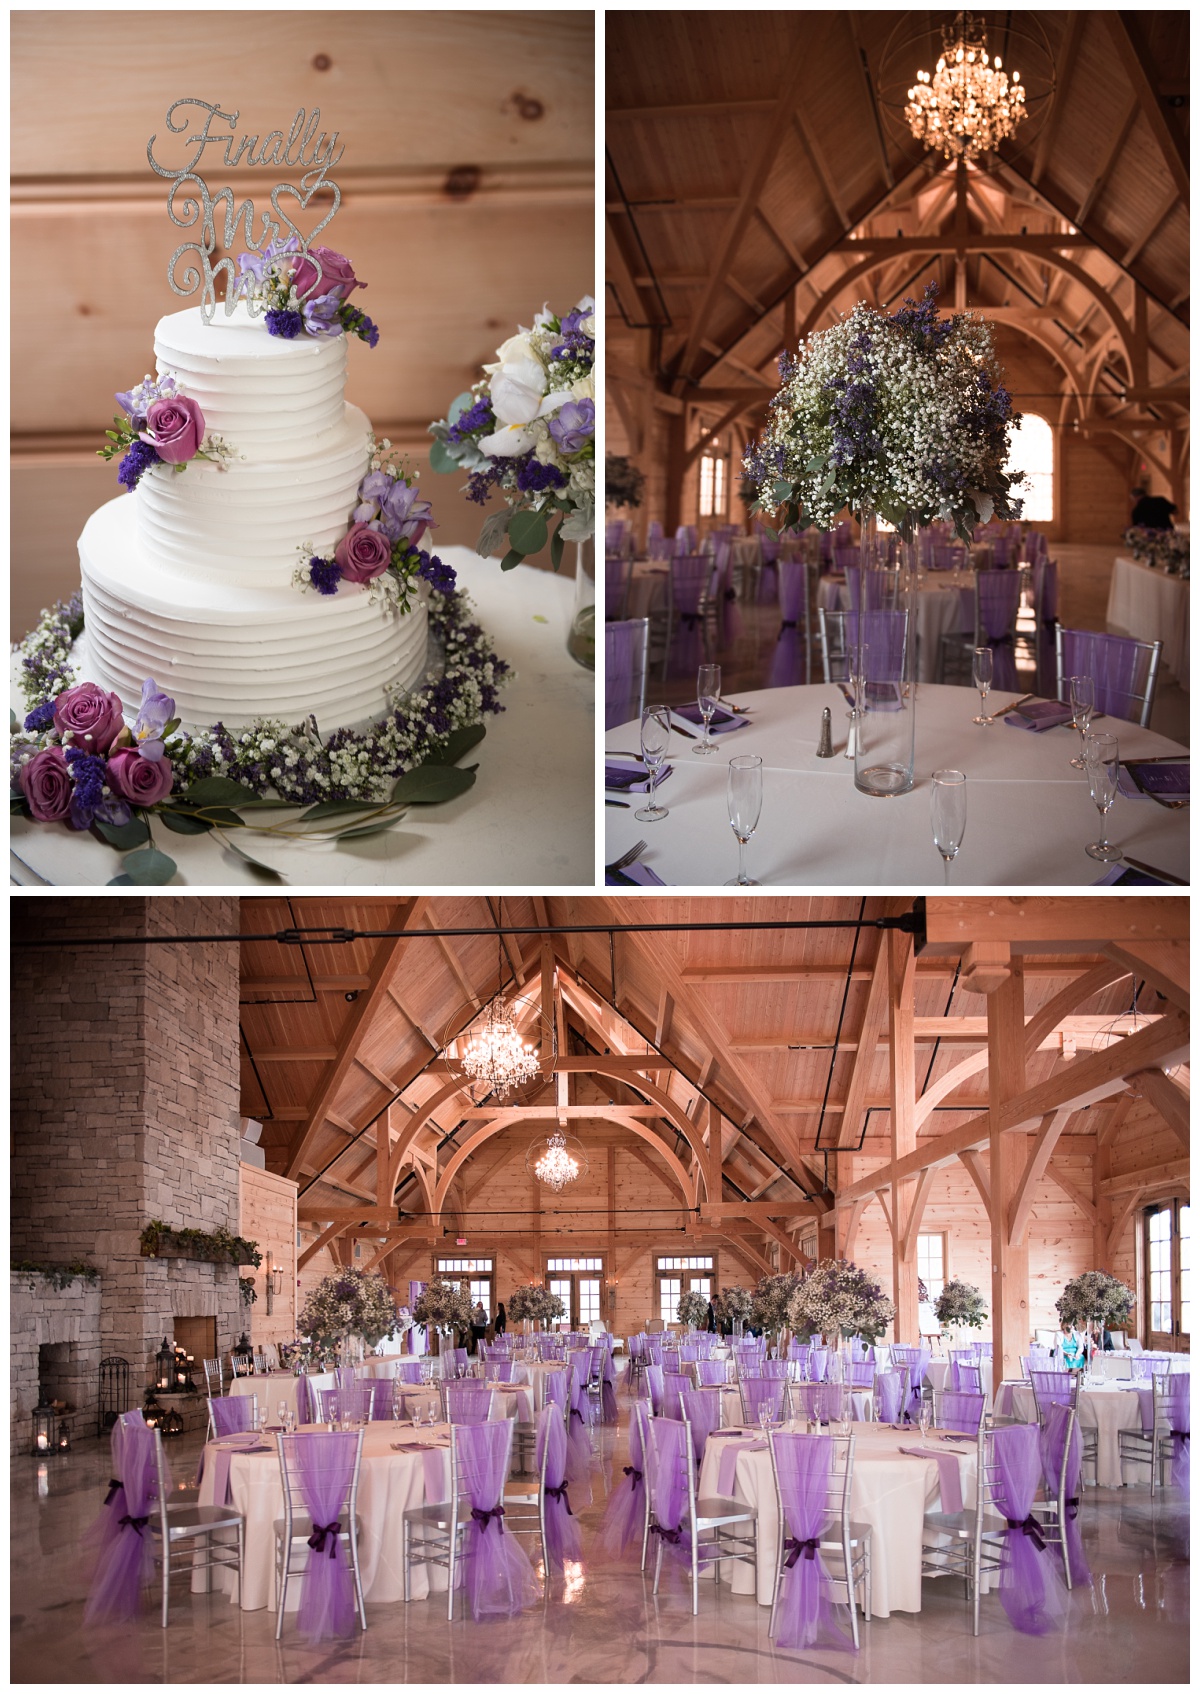 three tier white cake with purple rose and baby's breath accents by Wedding Wonderland Cakes, top left | Tall flower arrangement of baby's breath and lilac flowers on white linen, top right | The vaulted ceilings of Stone House of St. Charles, a St Louis wedding venue, with white tables and silver chiavari chairs with purple tulle decor, lower